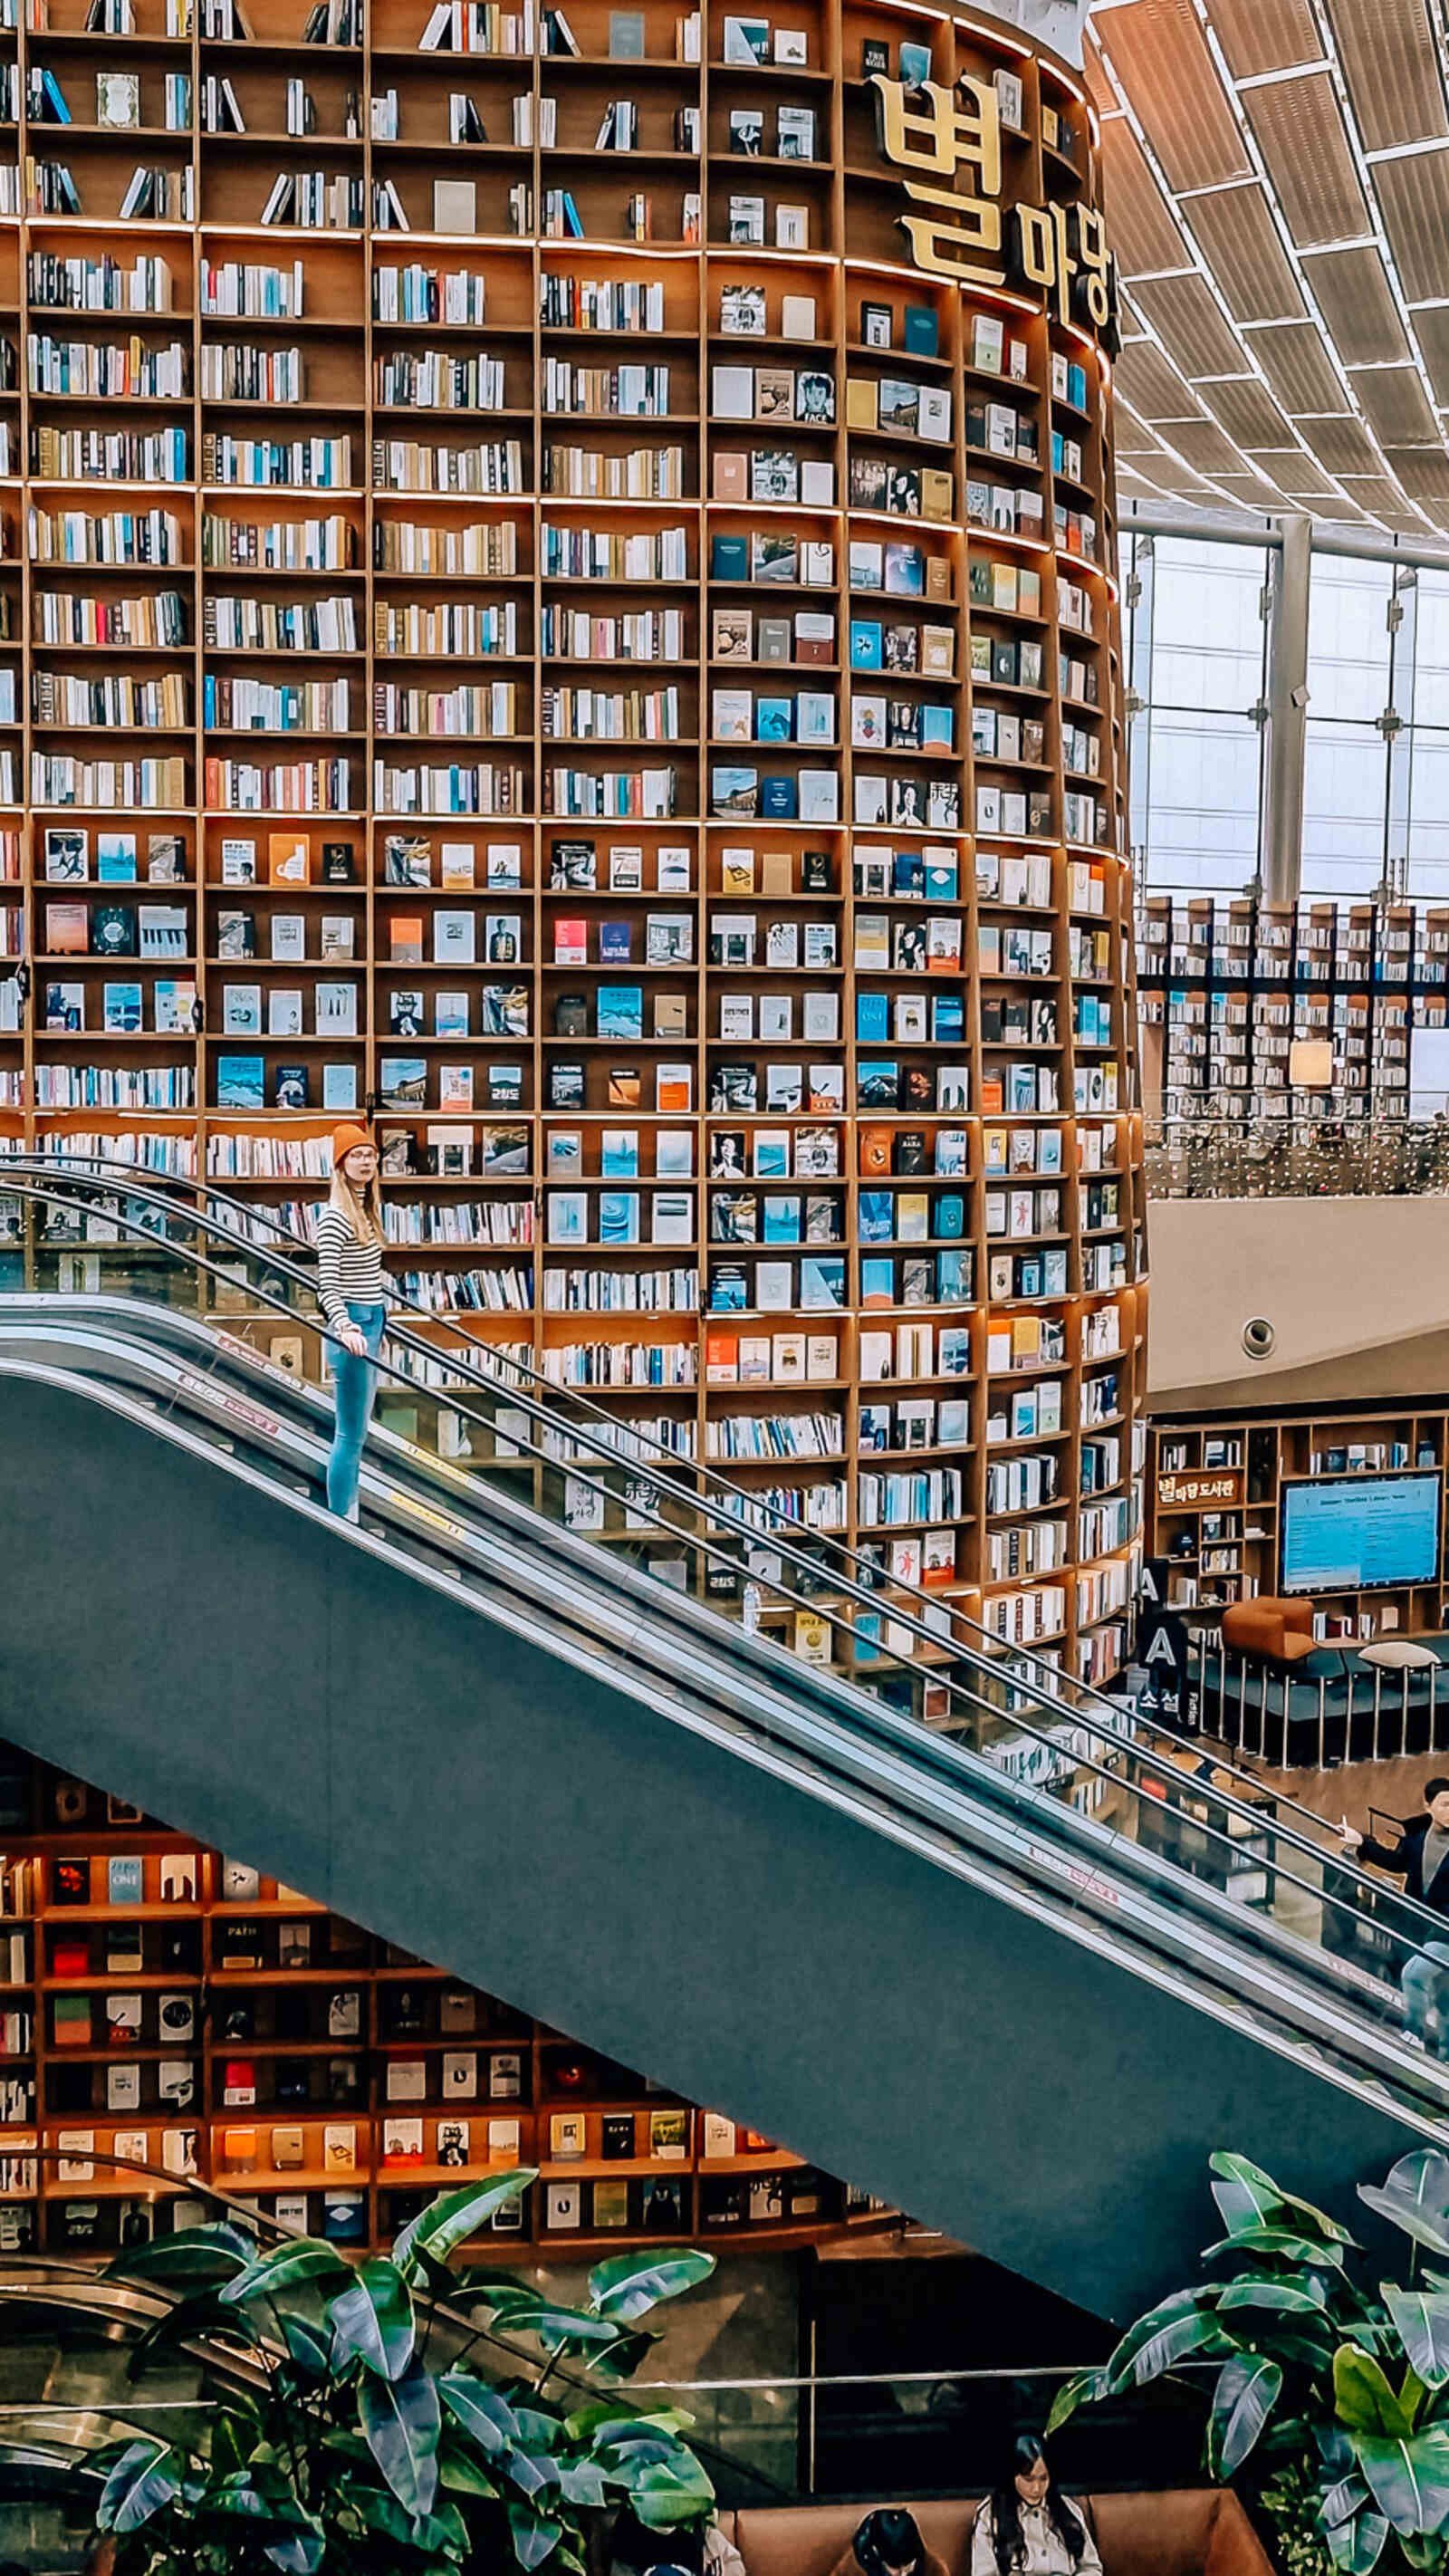 a huge atrium filled with floor to ceiling bookshelves with a woman going down an escalator in front of the shelves